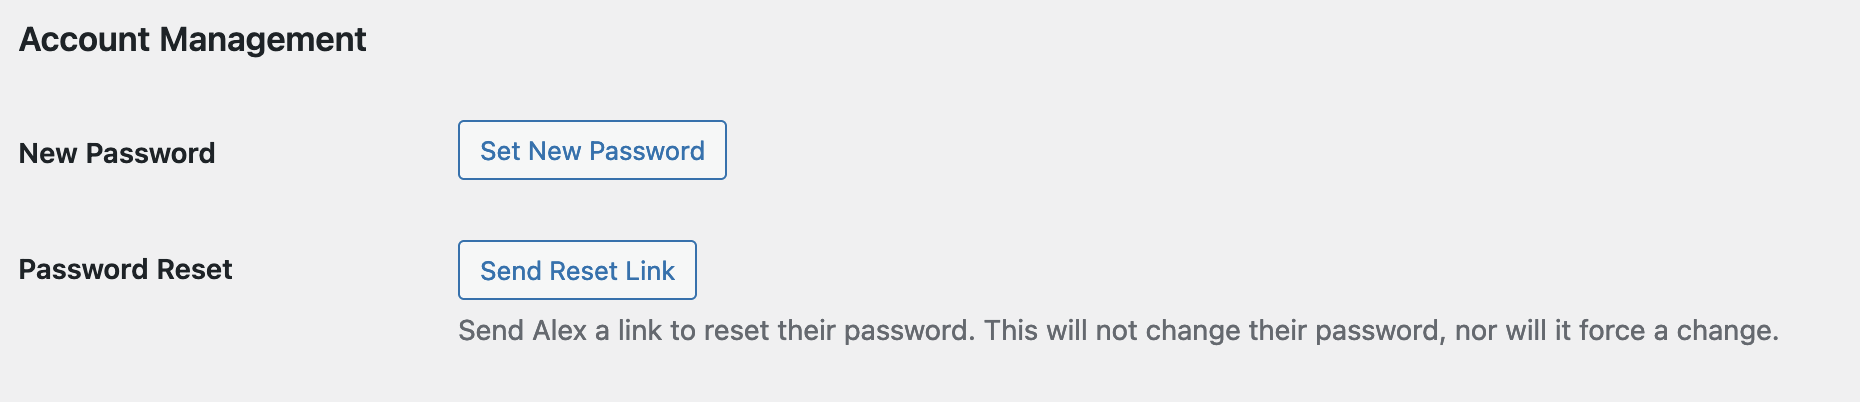 The account management section allows you to set a new password.